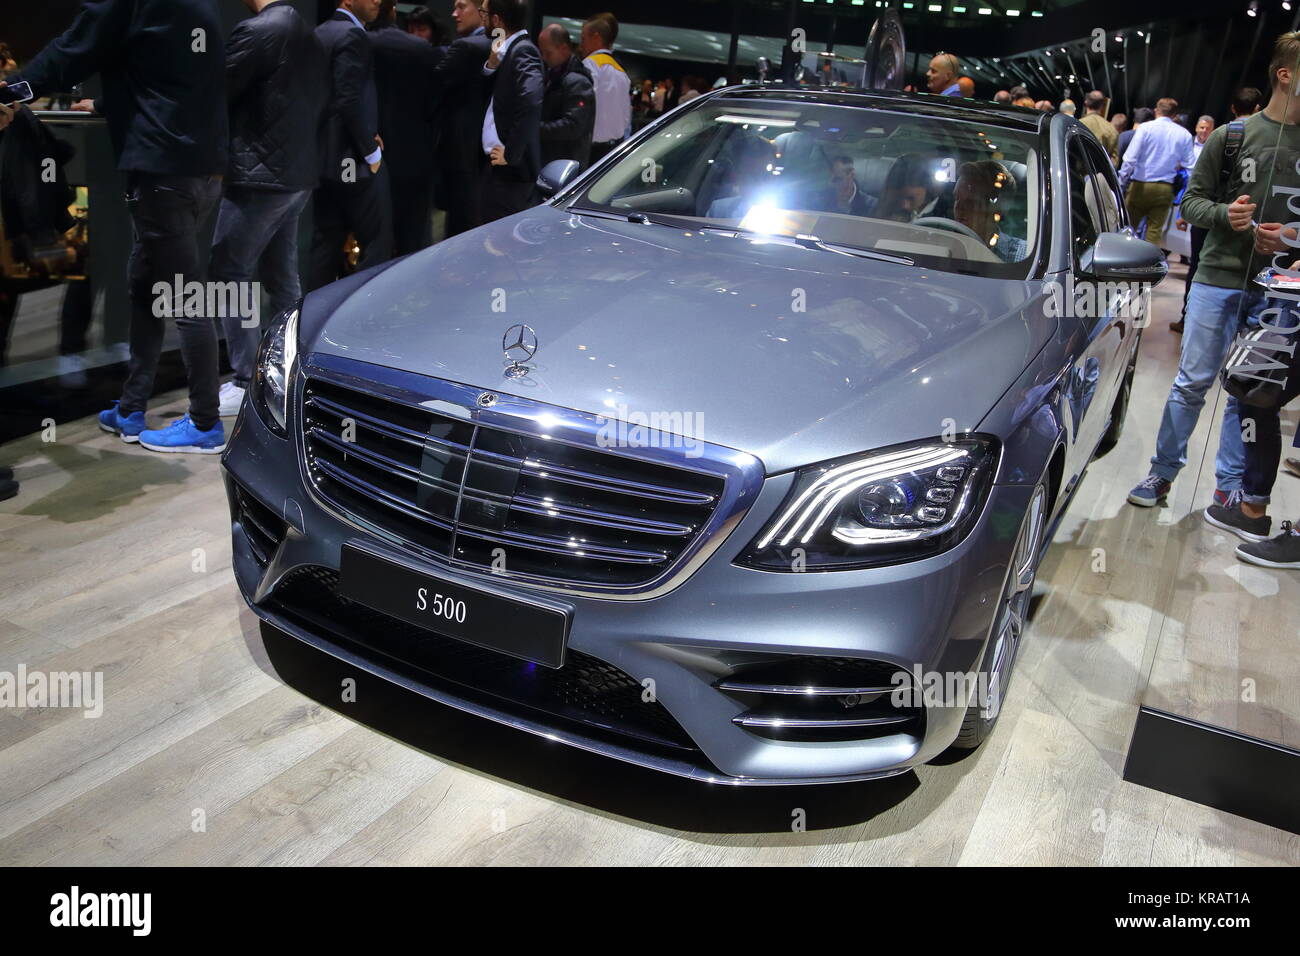 Mercedes Benz S 500 saloon at the Frankfurt Motor Show 2017, Germany Stock Photo